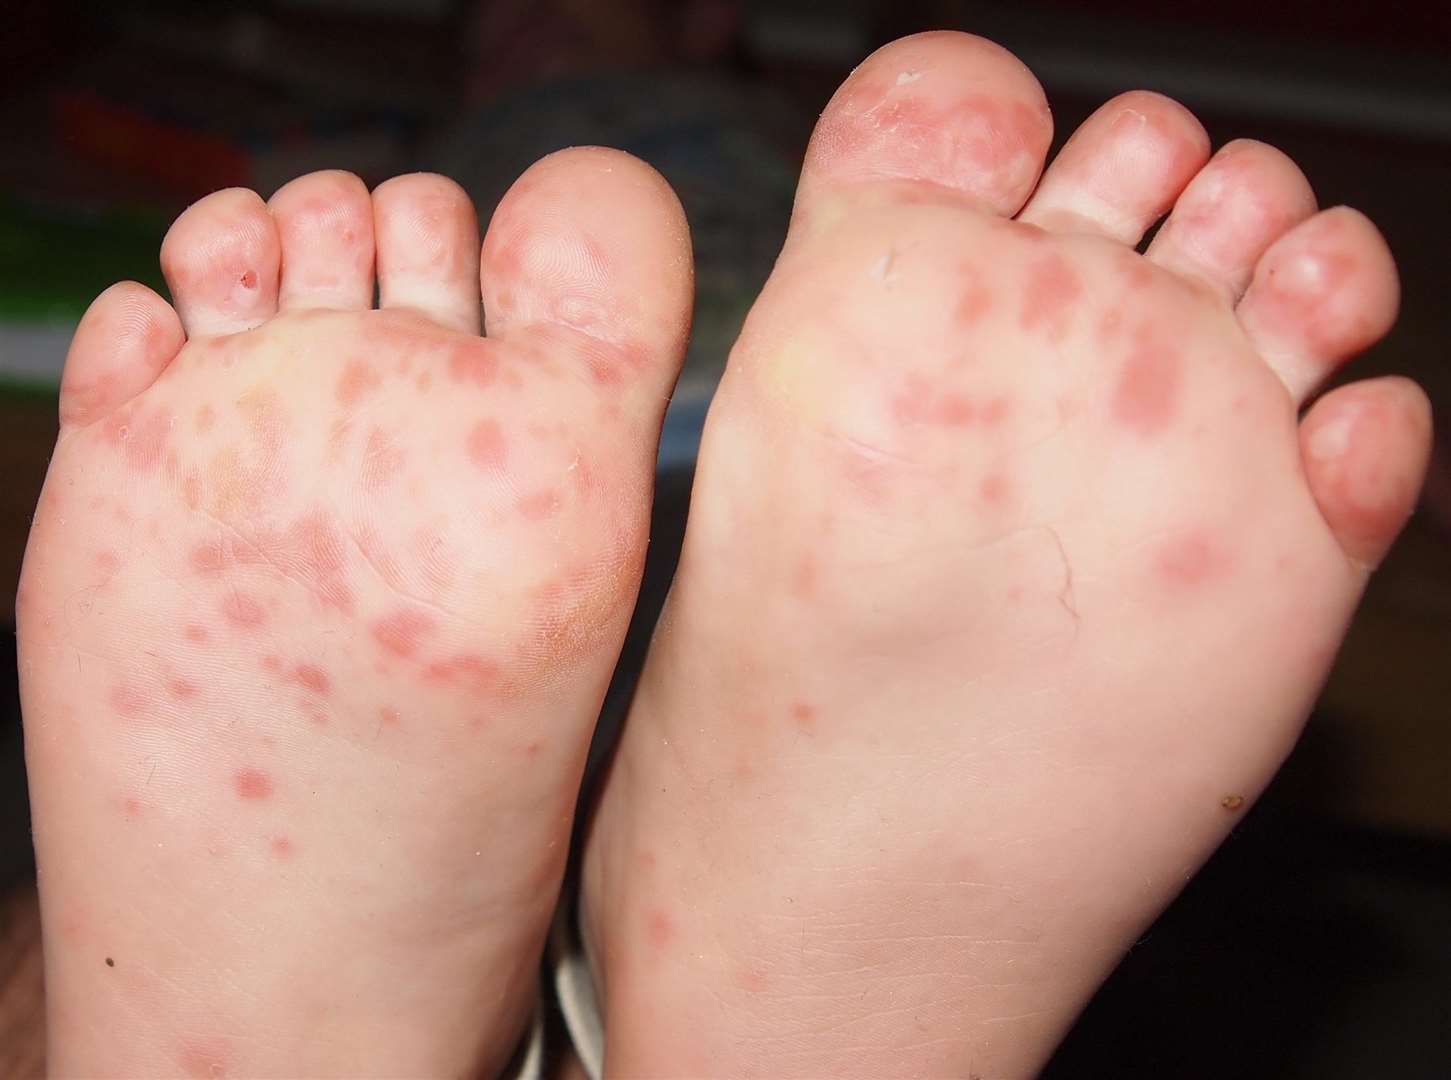 Hand, foot and mouth can cause a rash on the child's feet. Library image.